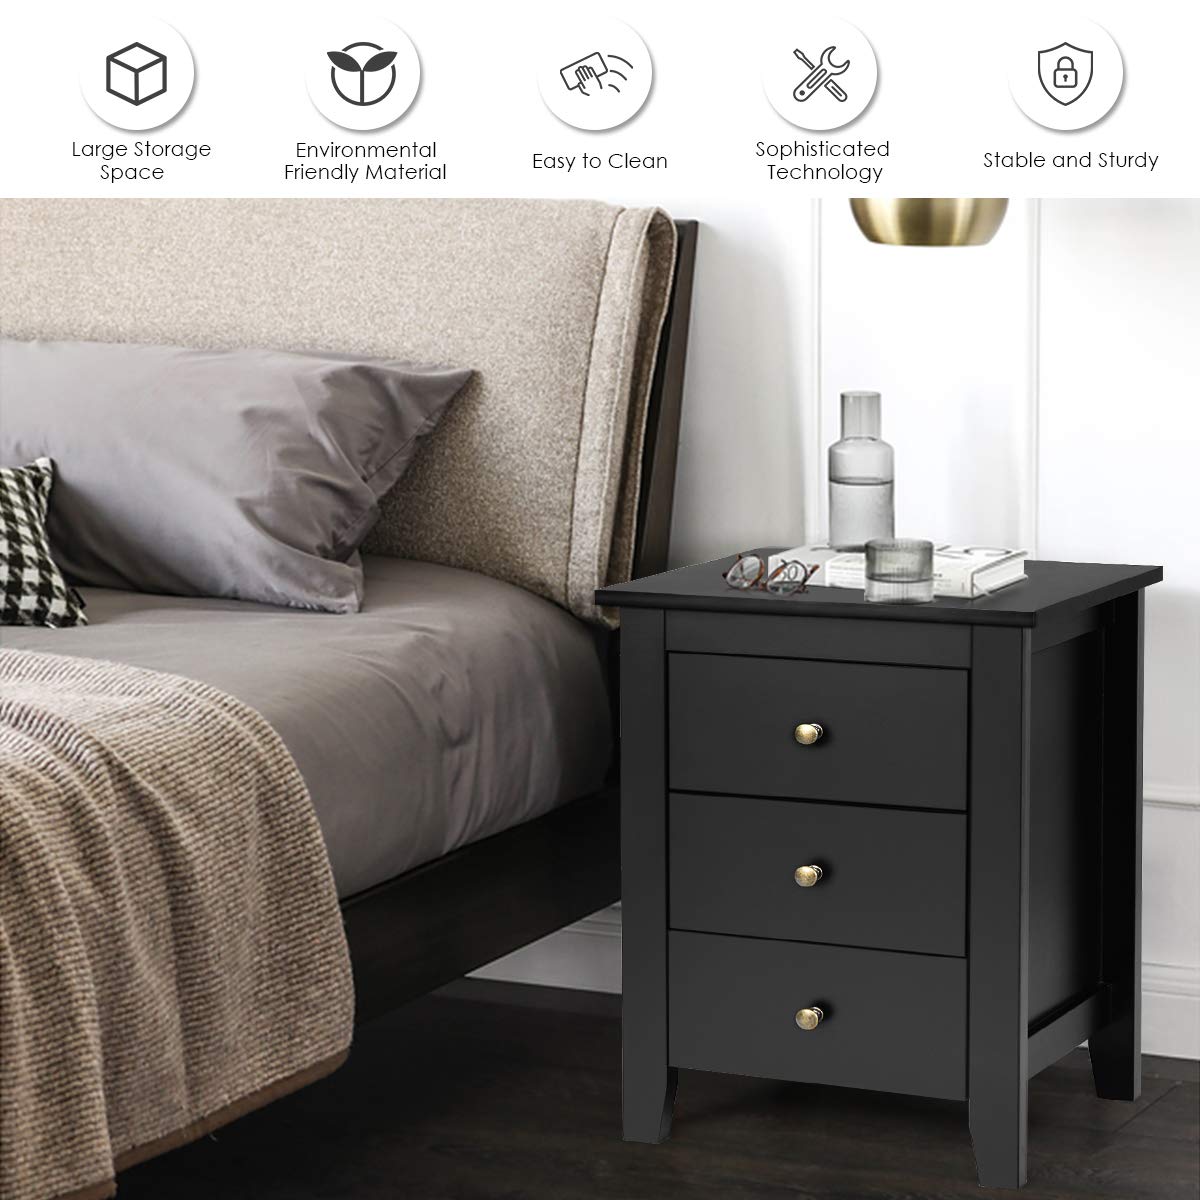 Suitable for Bedroom Bedsides Table Accent Table End Table